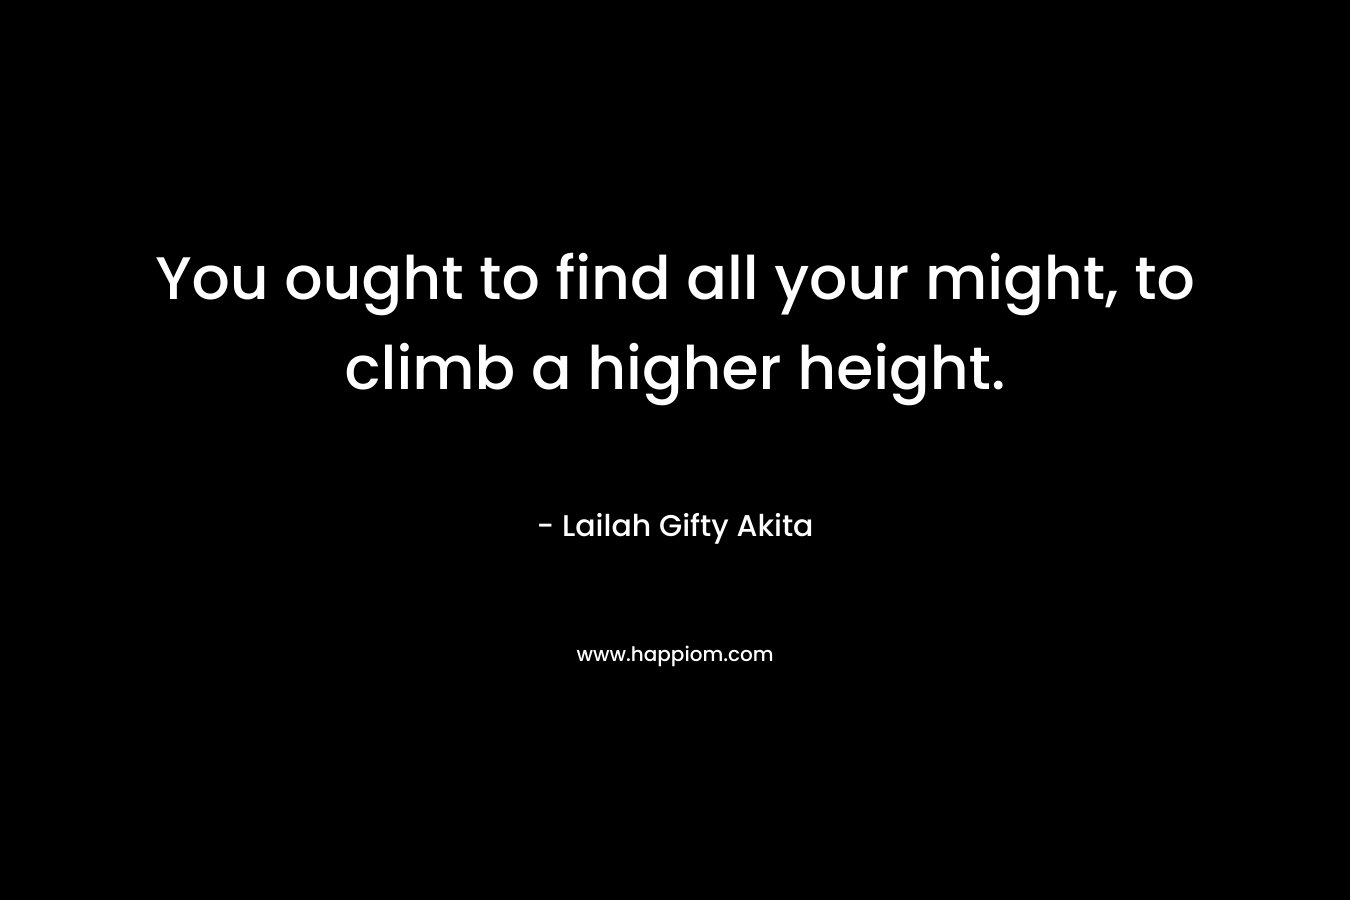 You ought to find all your might, to climb a higher height.